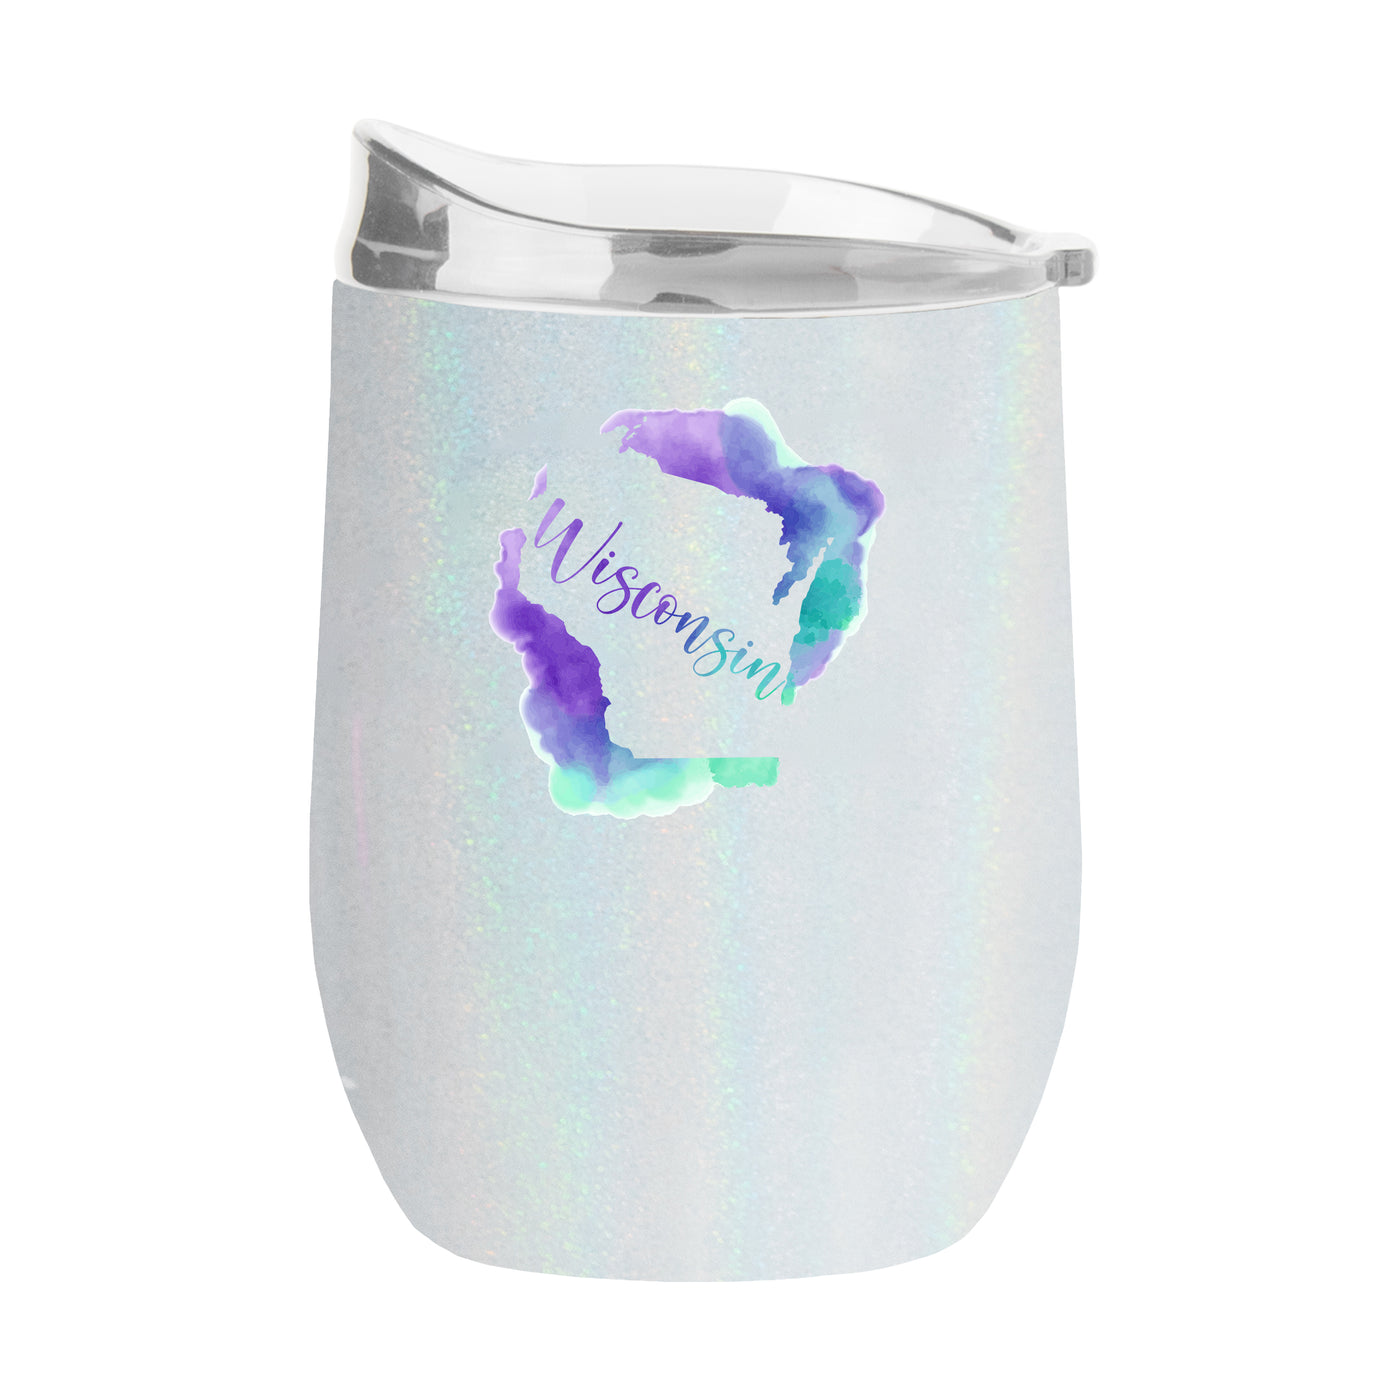 State of Wisconsin 16oz Iridescent Curved Beverage